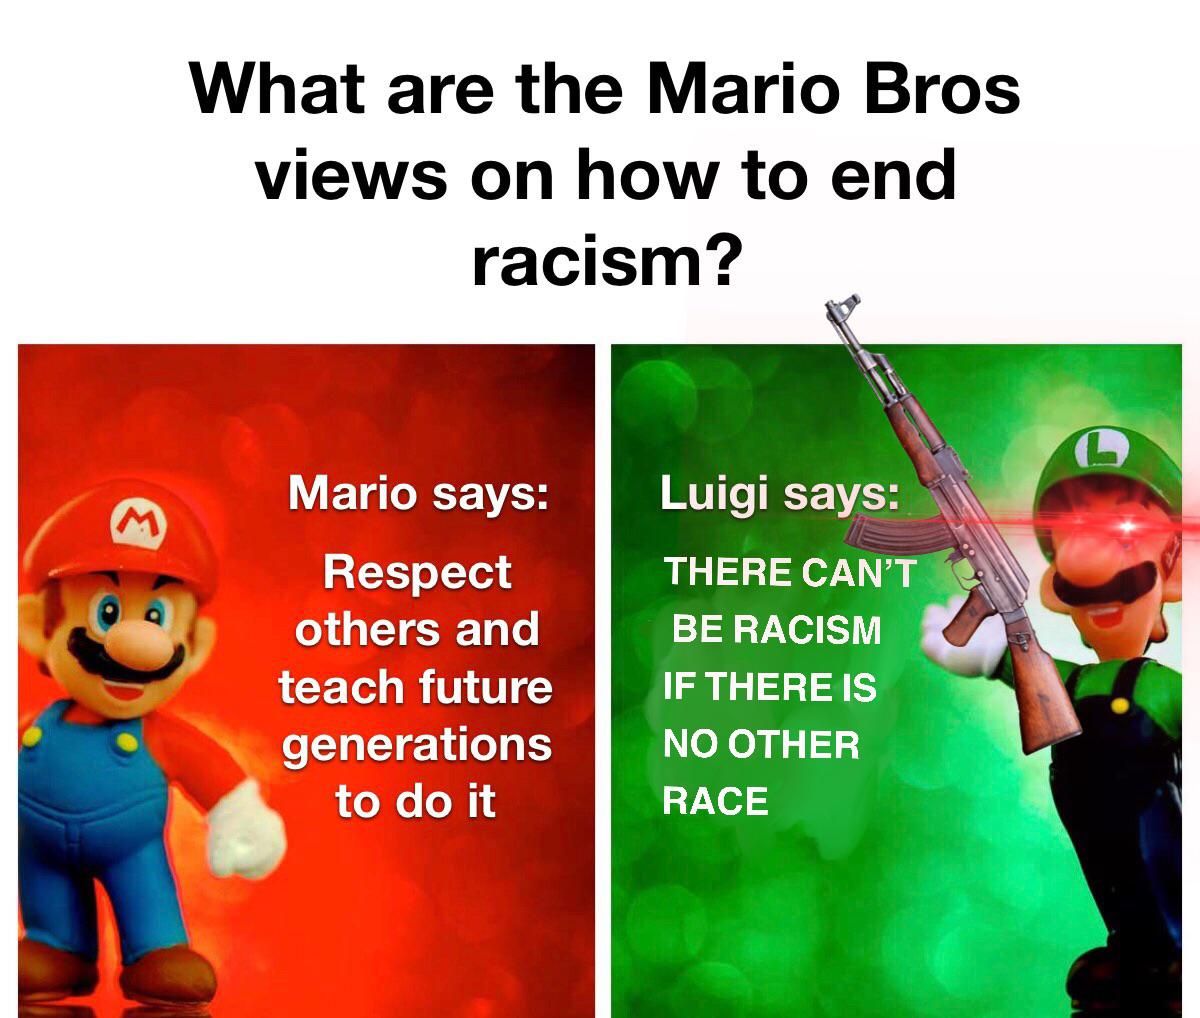 End racism!!!